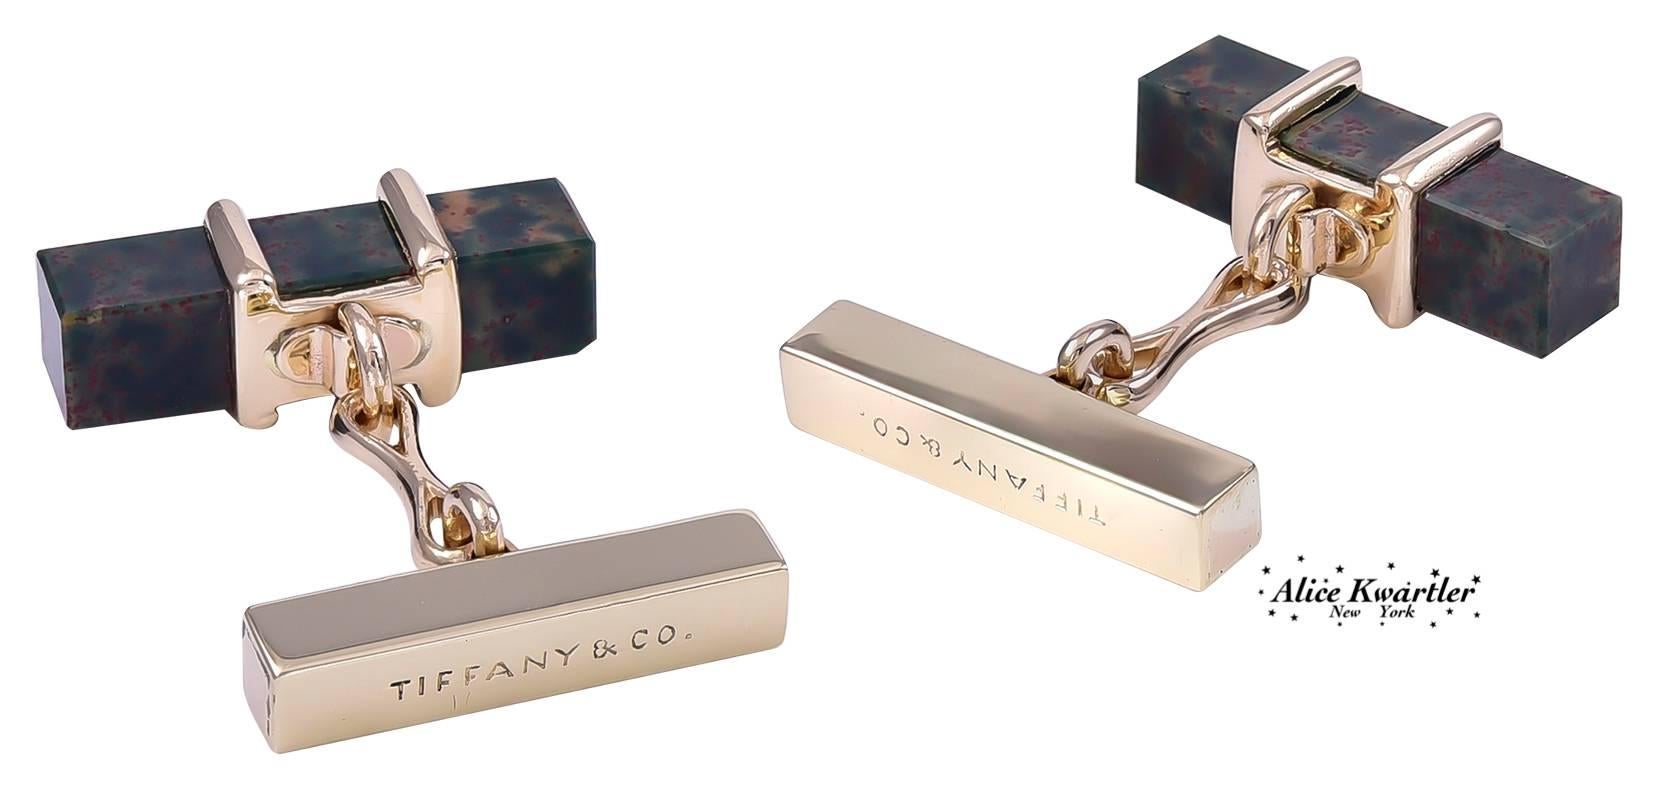 Masculine square bar-shaped cufflinks.  Made and signed by TIFFANY & CO.  14K yellow gold, wrapped around a square bar of bloodstone.  3/4" long.  Distinctive and handsome.

Alice Kwartler has sold the finest antique gold and diamond